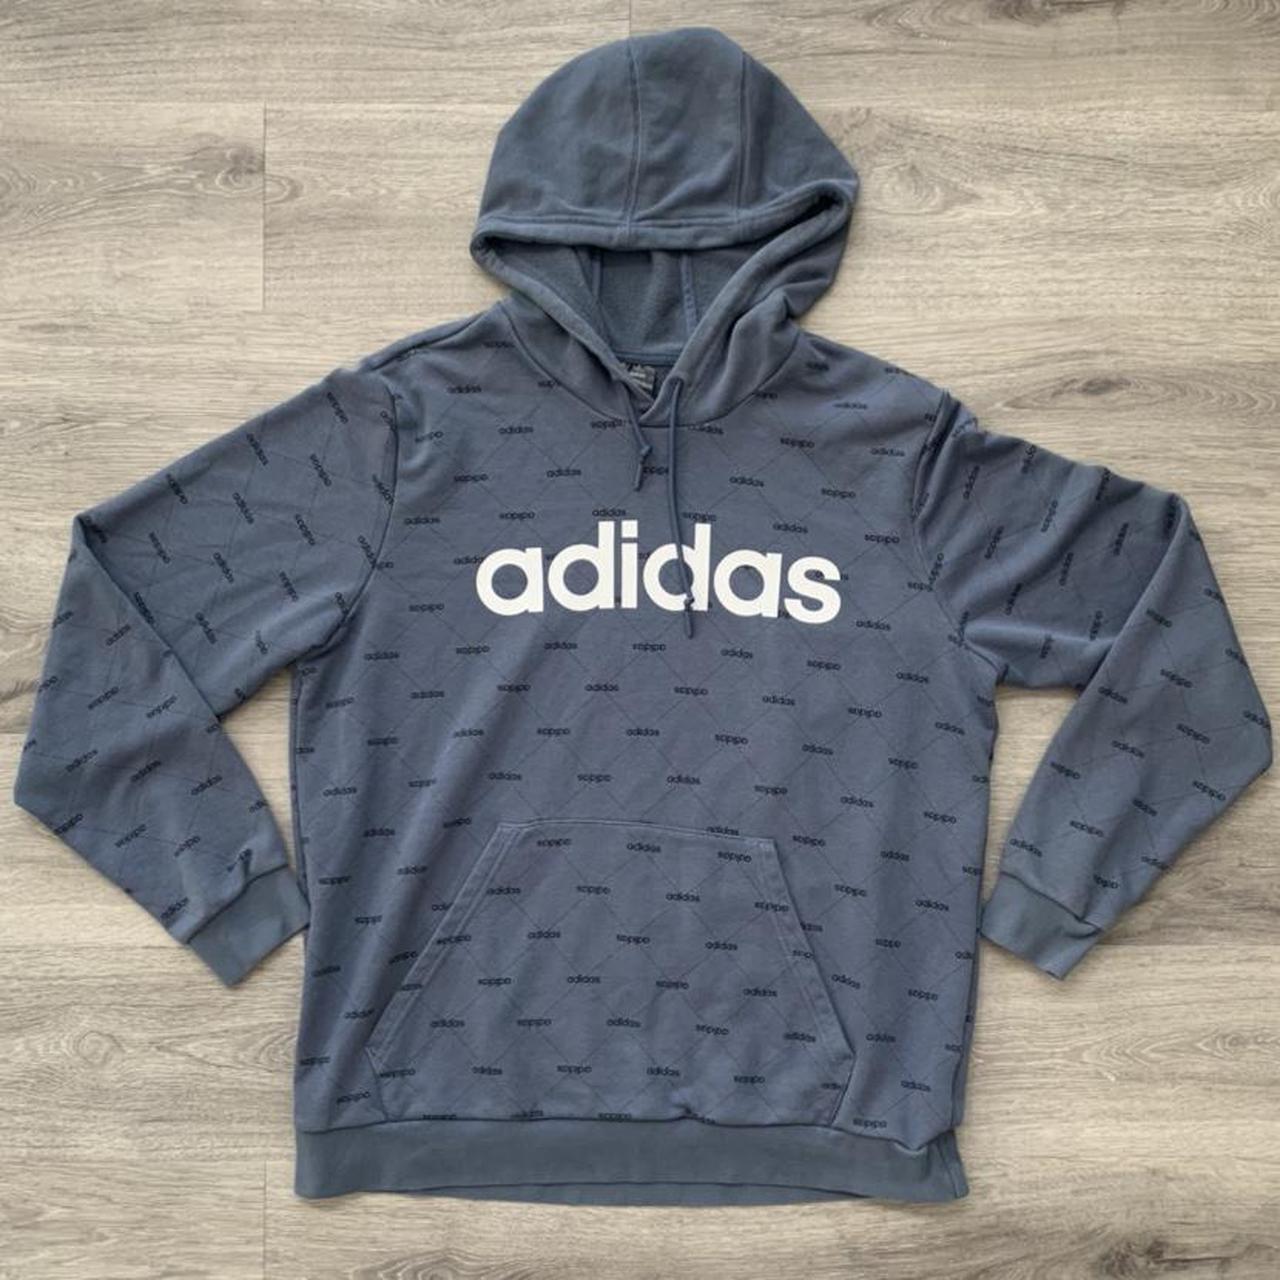 Adidas Men's Blue and White Hoodie